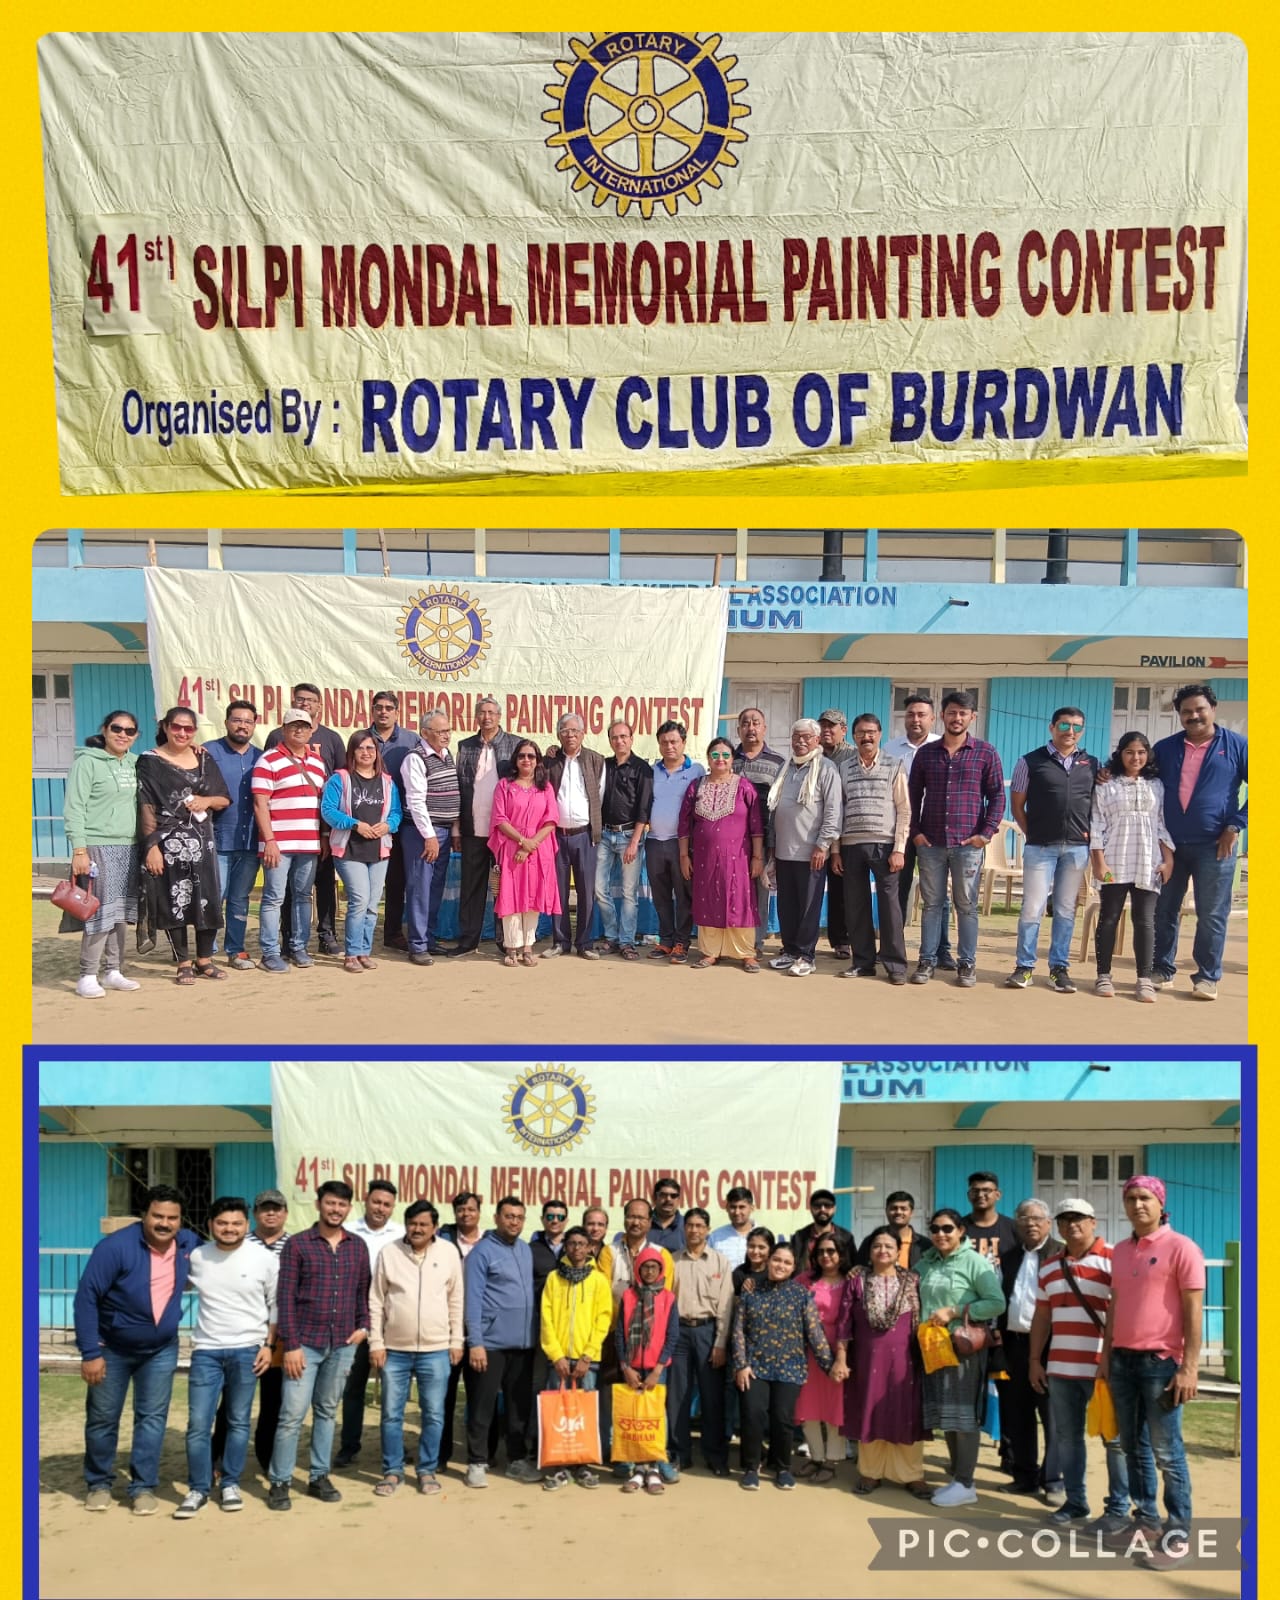 Annual Silpi Mondal Memorial Painting Contest.